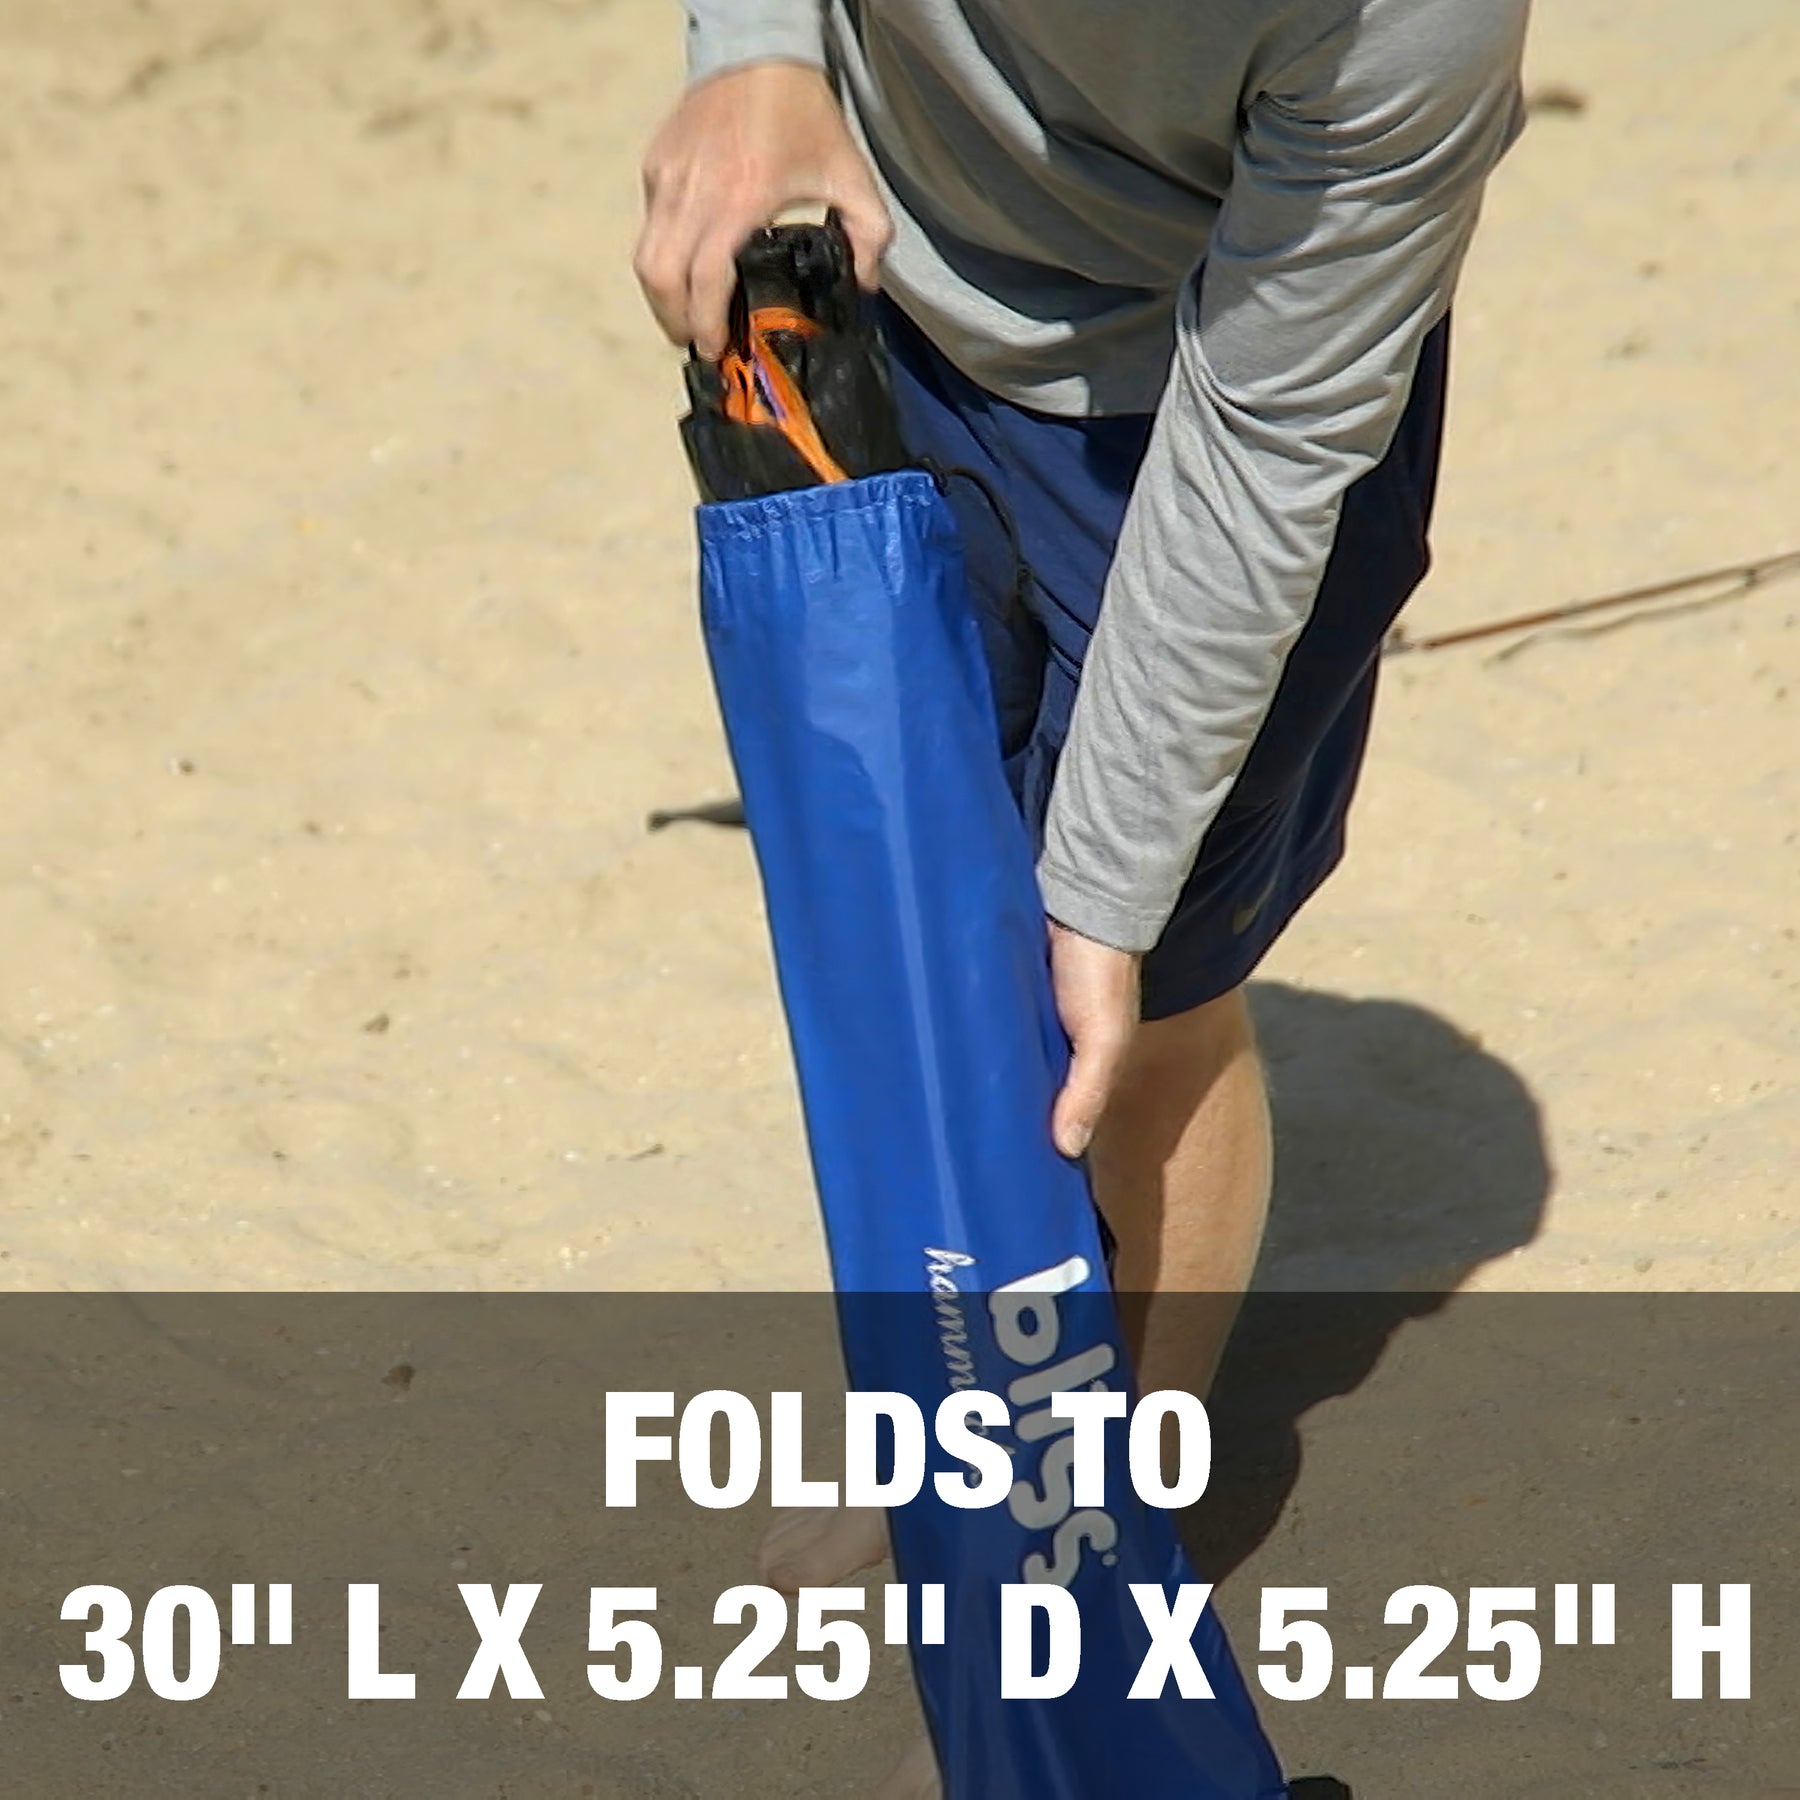 Fold to a length of 30 inches, diameter of 5.25 inches, and a height of 5.25 inches.